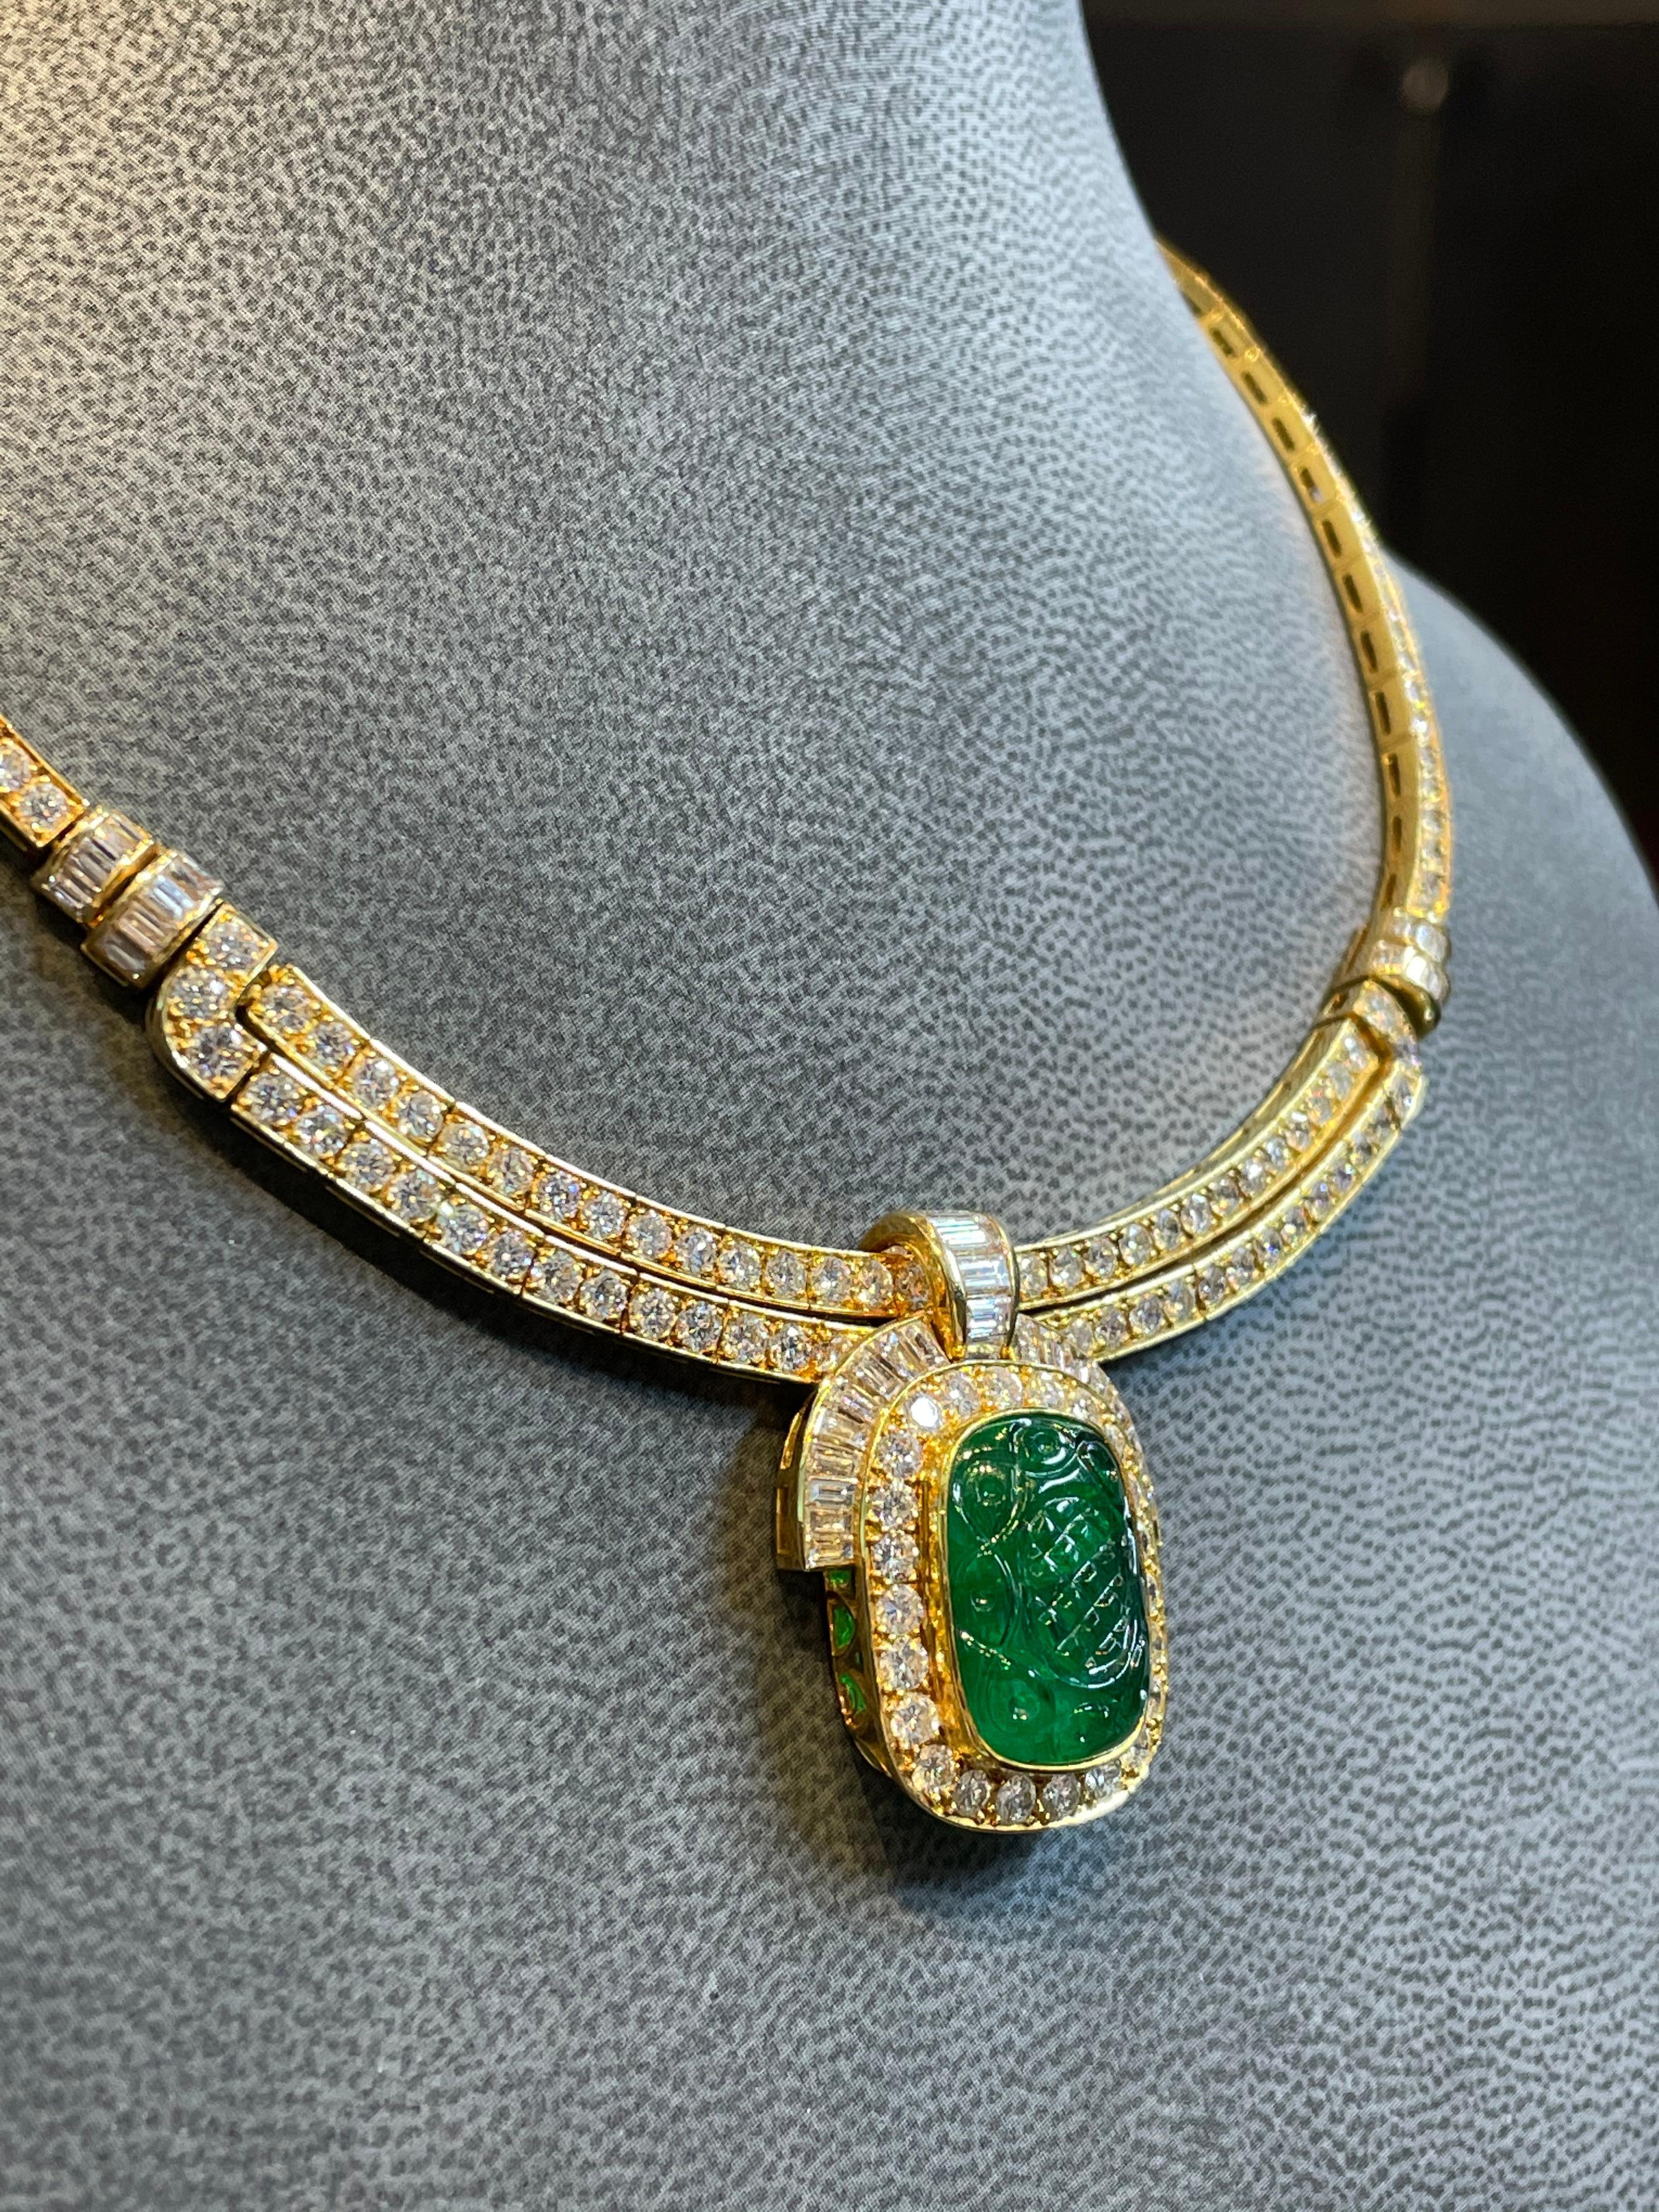 Women's Van Cleef & Arpels Carved Emerald and Diamond Necklace